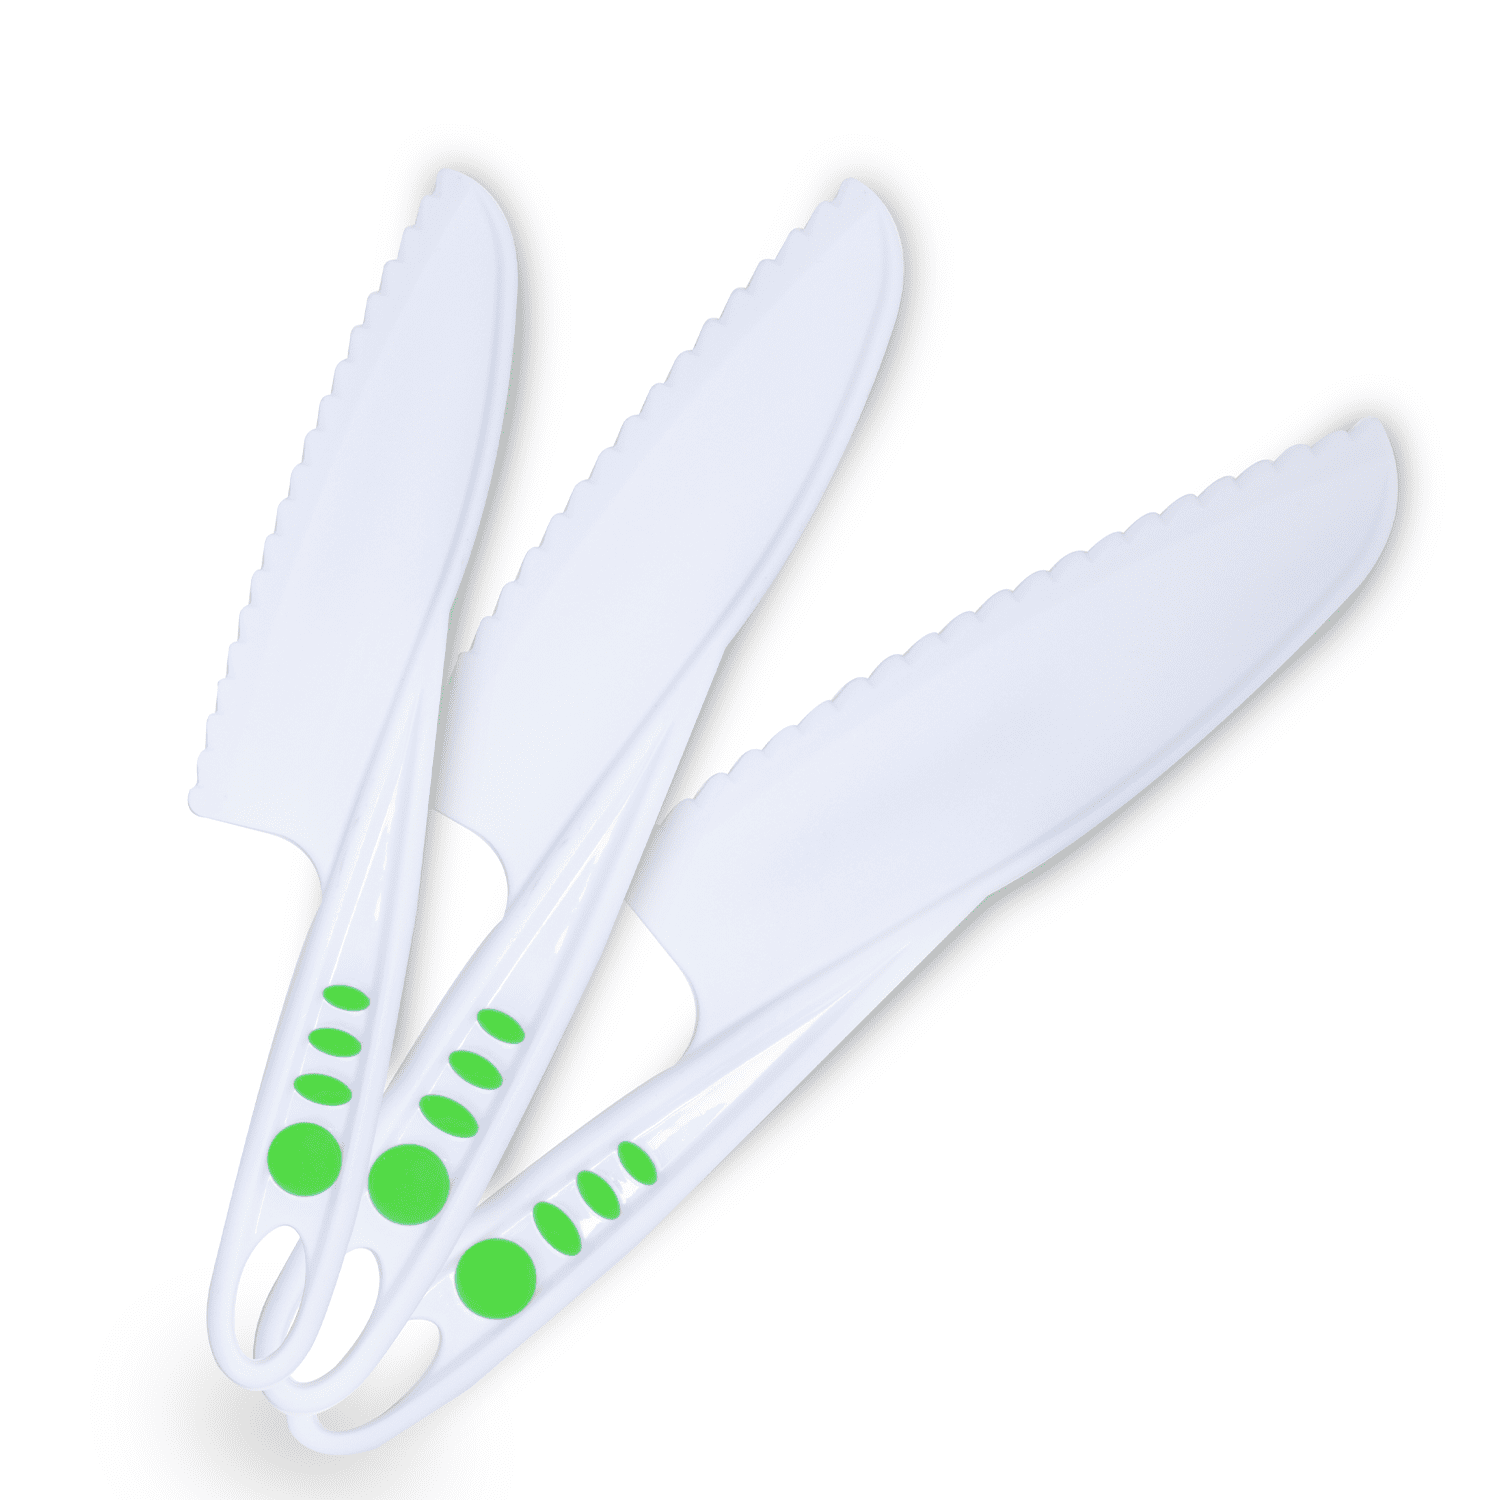 Curious Chef 3-Piece Nylon Knife Set, Real Cooking Tools Made To Fit Kids'  Hands; Great Gift For Birthdays, Holidays And Other Special Occasions 